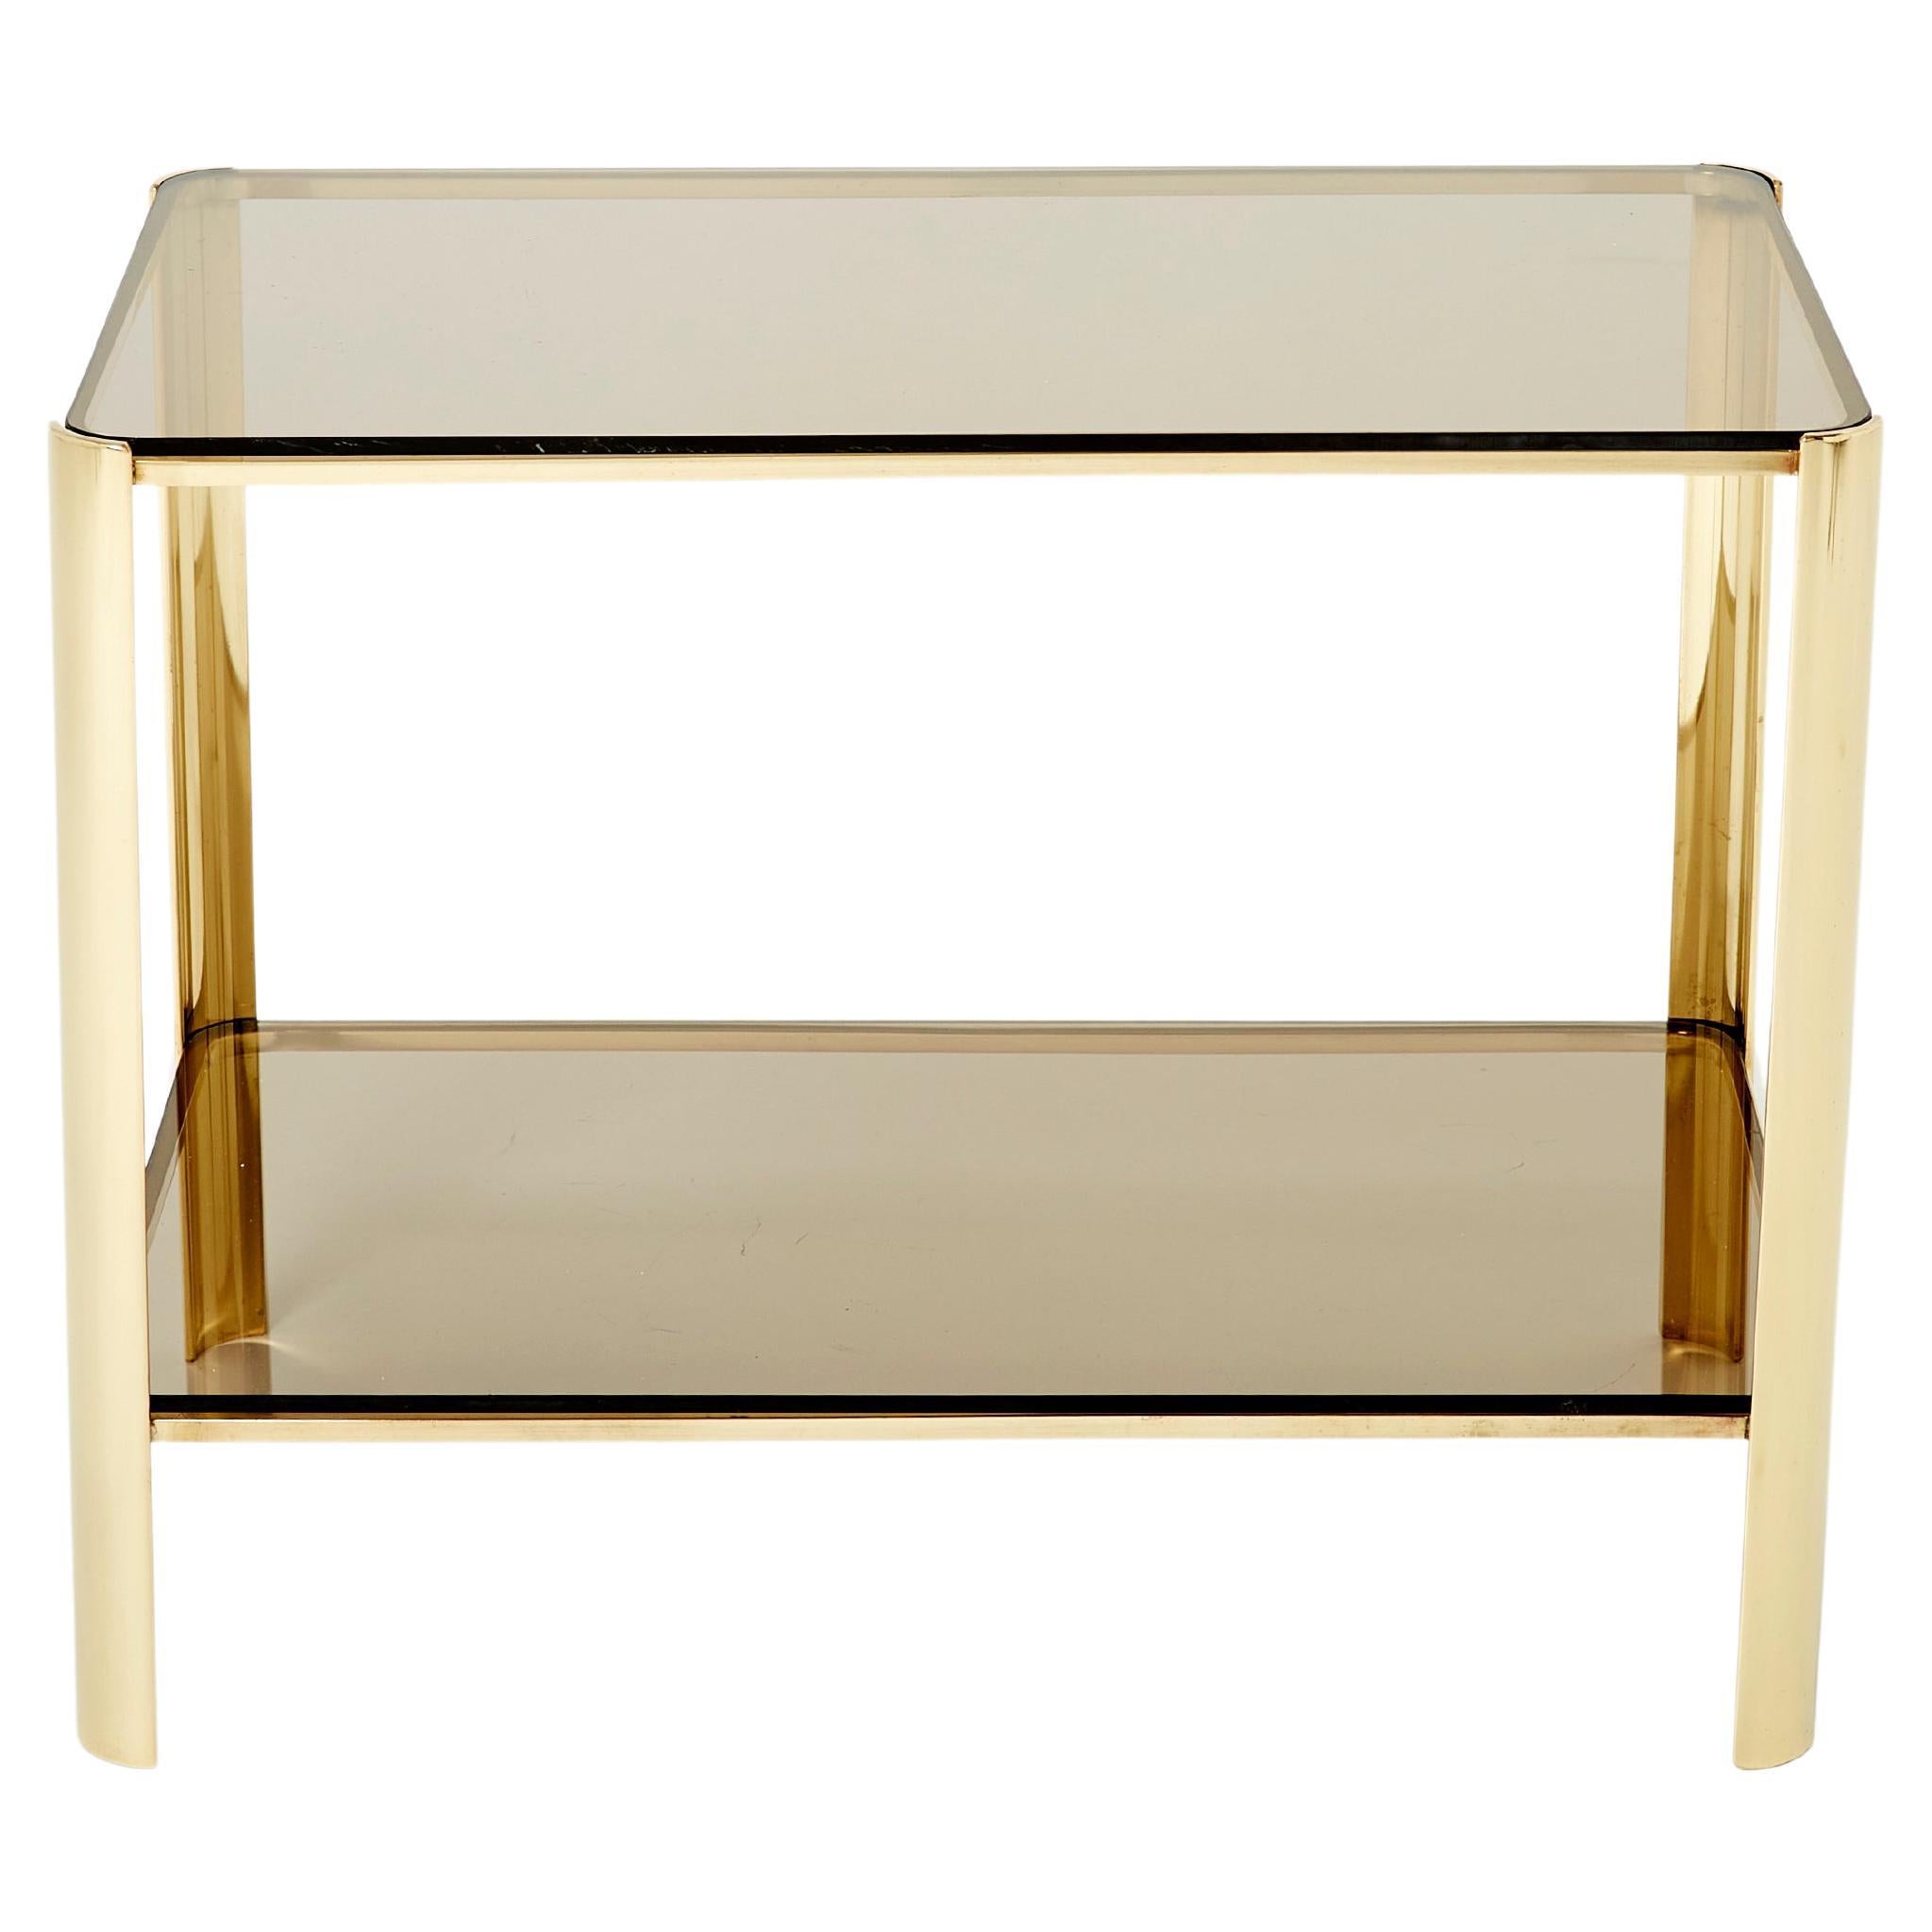 Two-Tier Bronze Side Table by Jacques Quinet for Broncz, 1960s